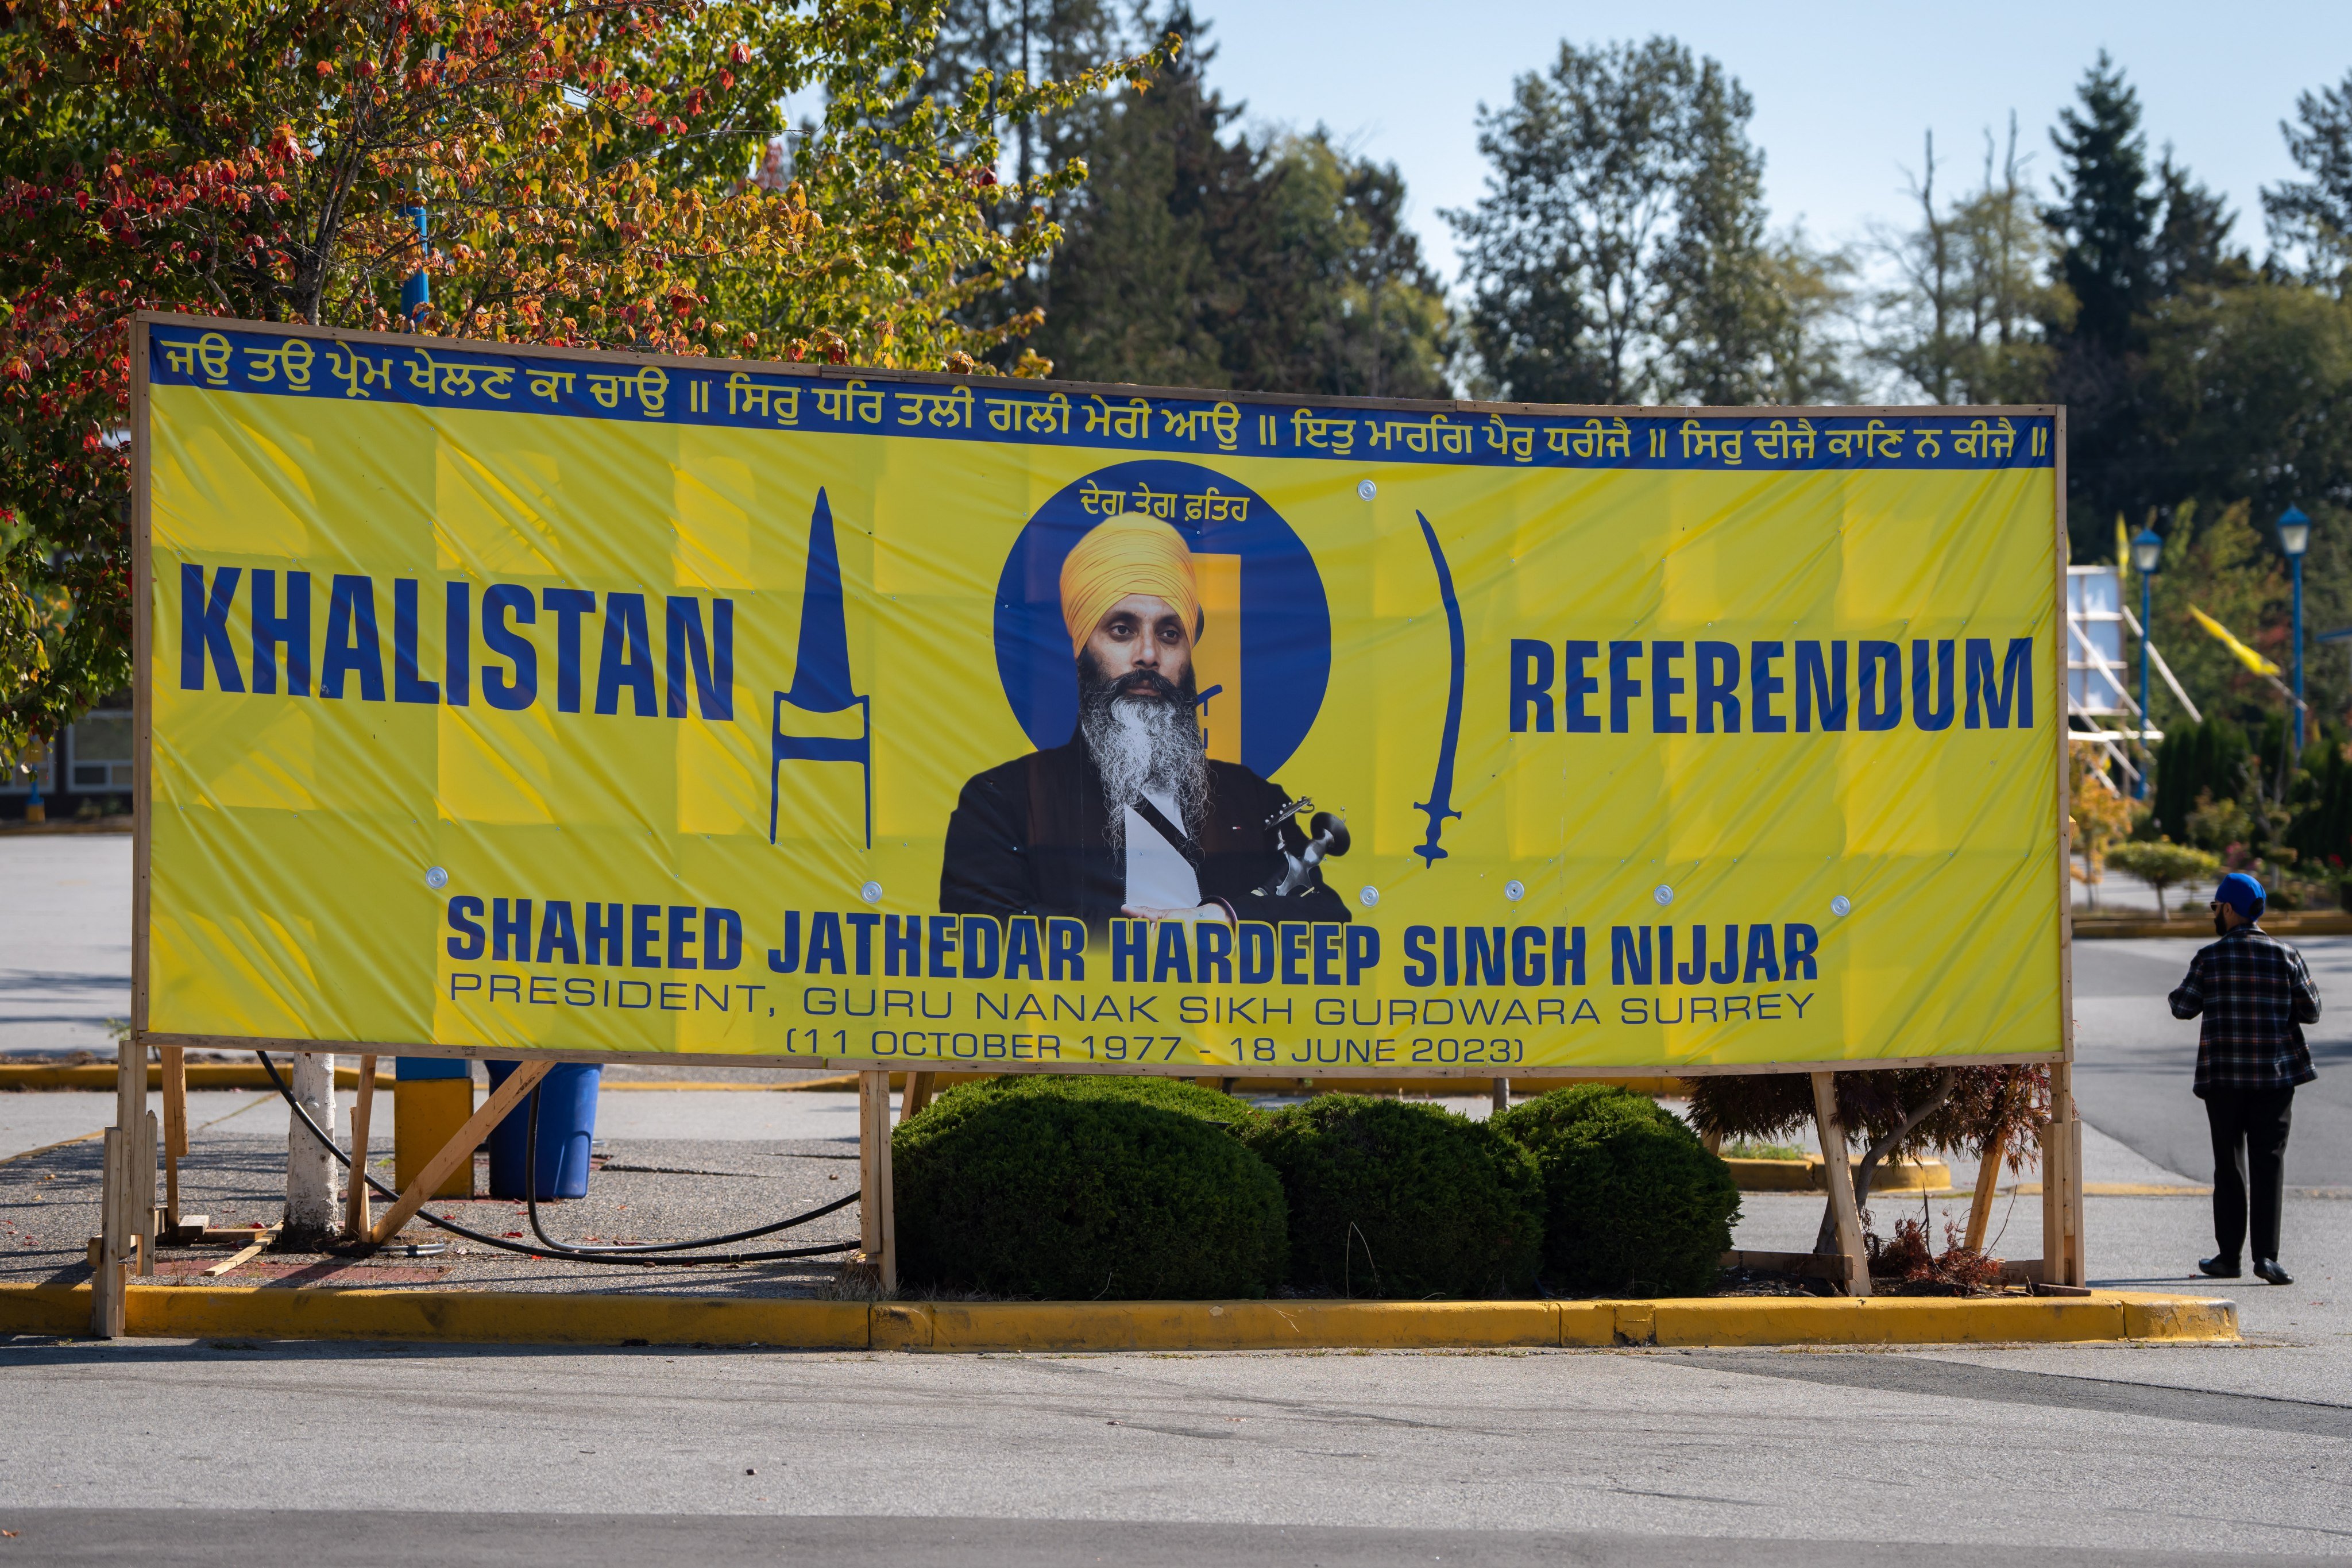 A memorial for Sikh leader Hardeep Singh Nijjar, who was shot and killed earlier this year, is displayed at the Guru Nanak Sikh Gurdwara temple in Surrey, British Columbia in Canada on September 22. Photo: EPA-EFE